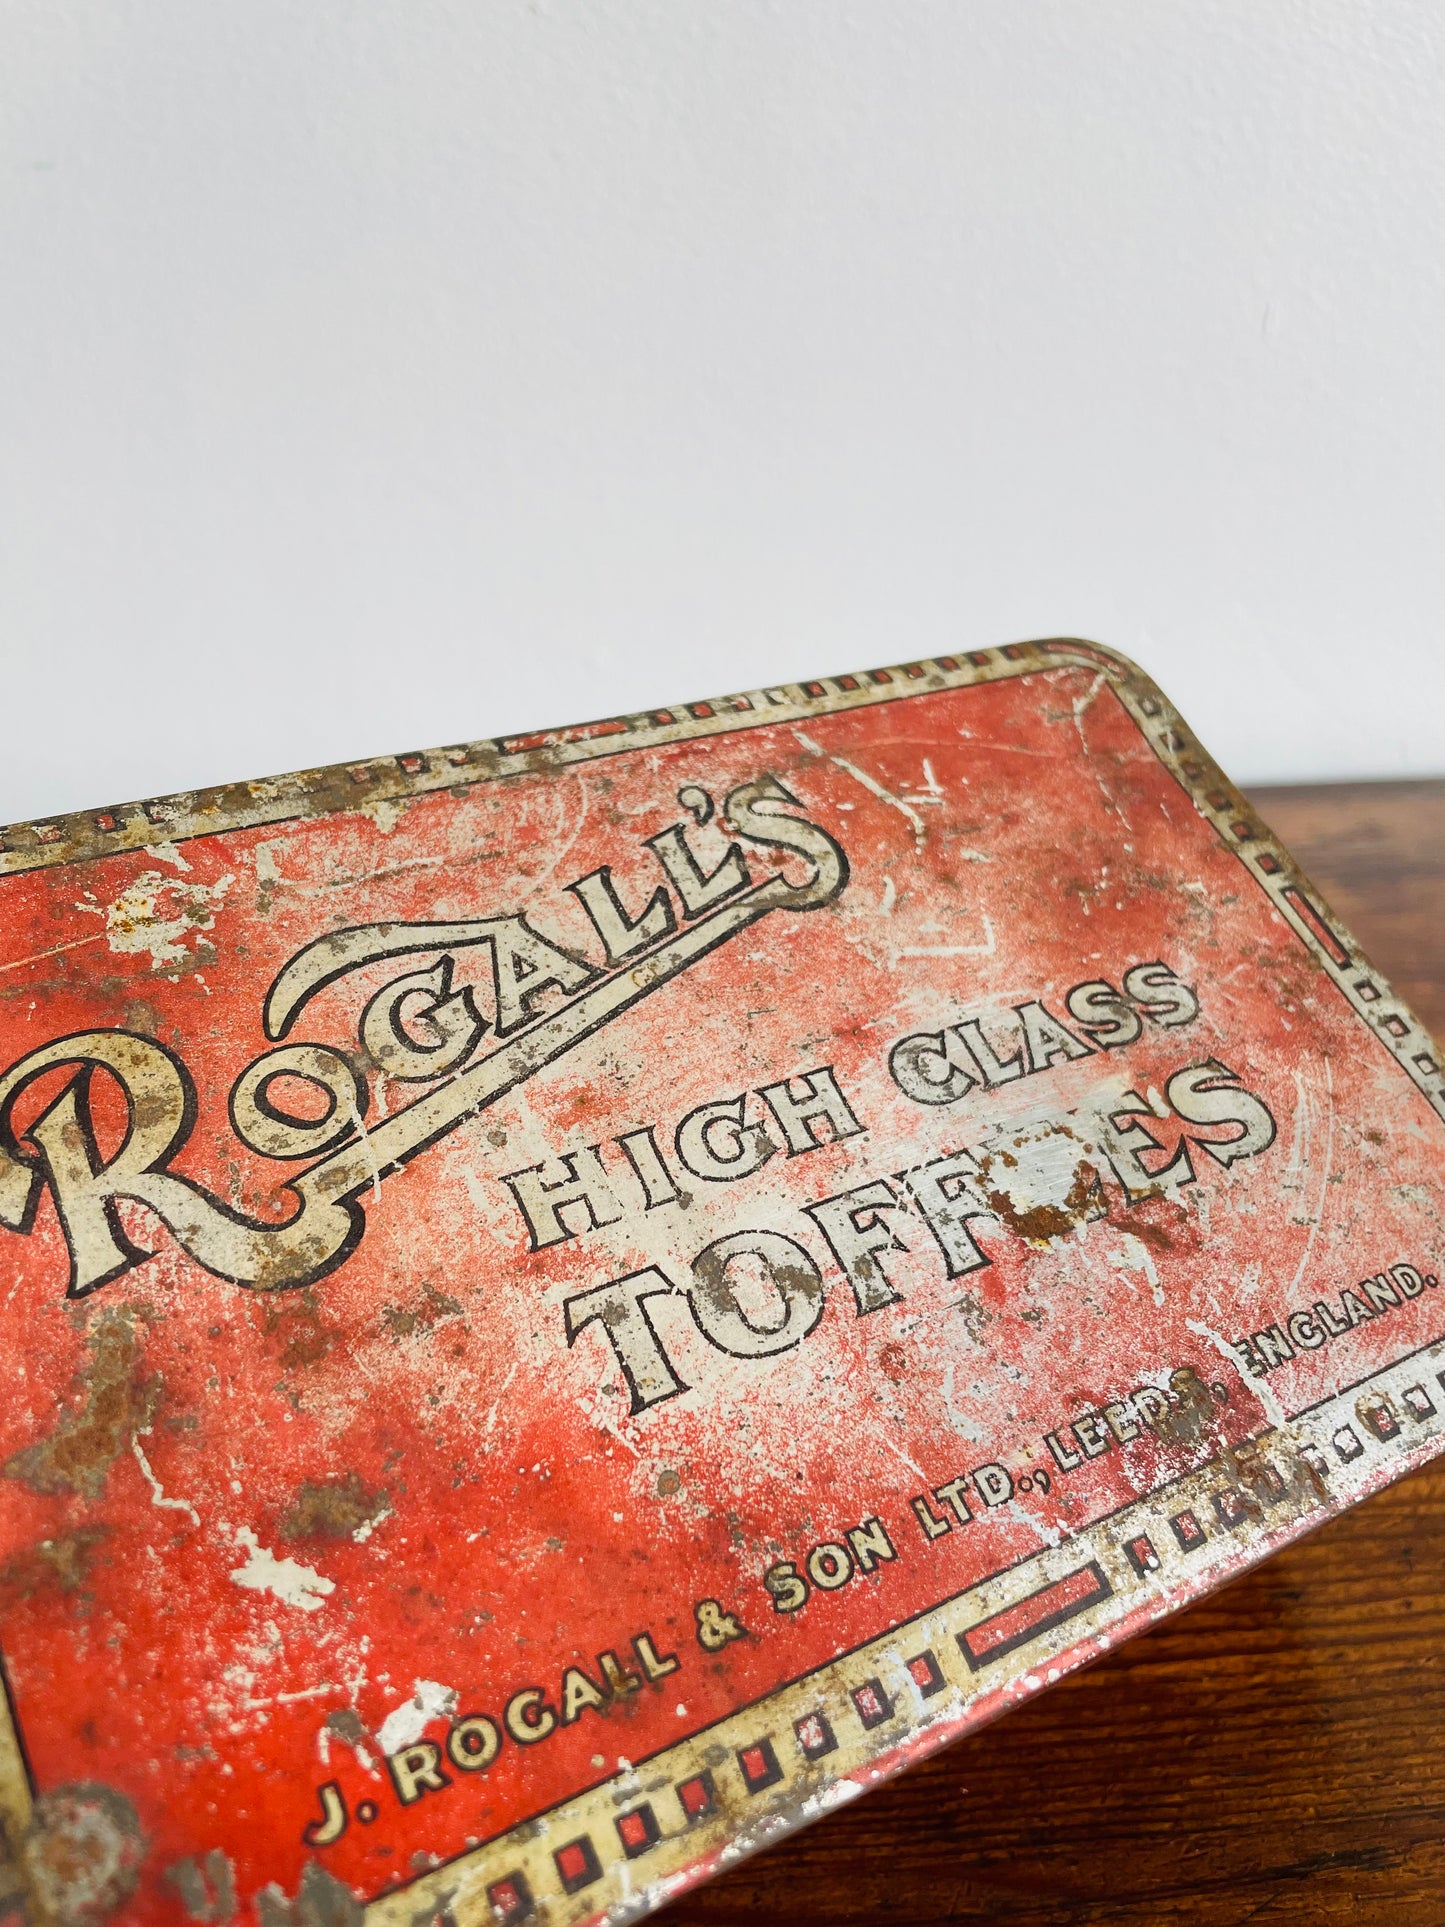 Rogall's High Class Toffees Tin with Hinged Lid - J. Rogall & Son Leeds England